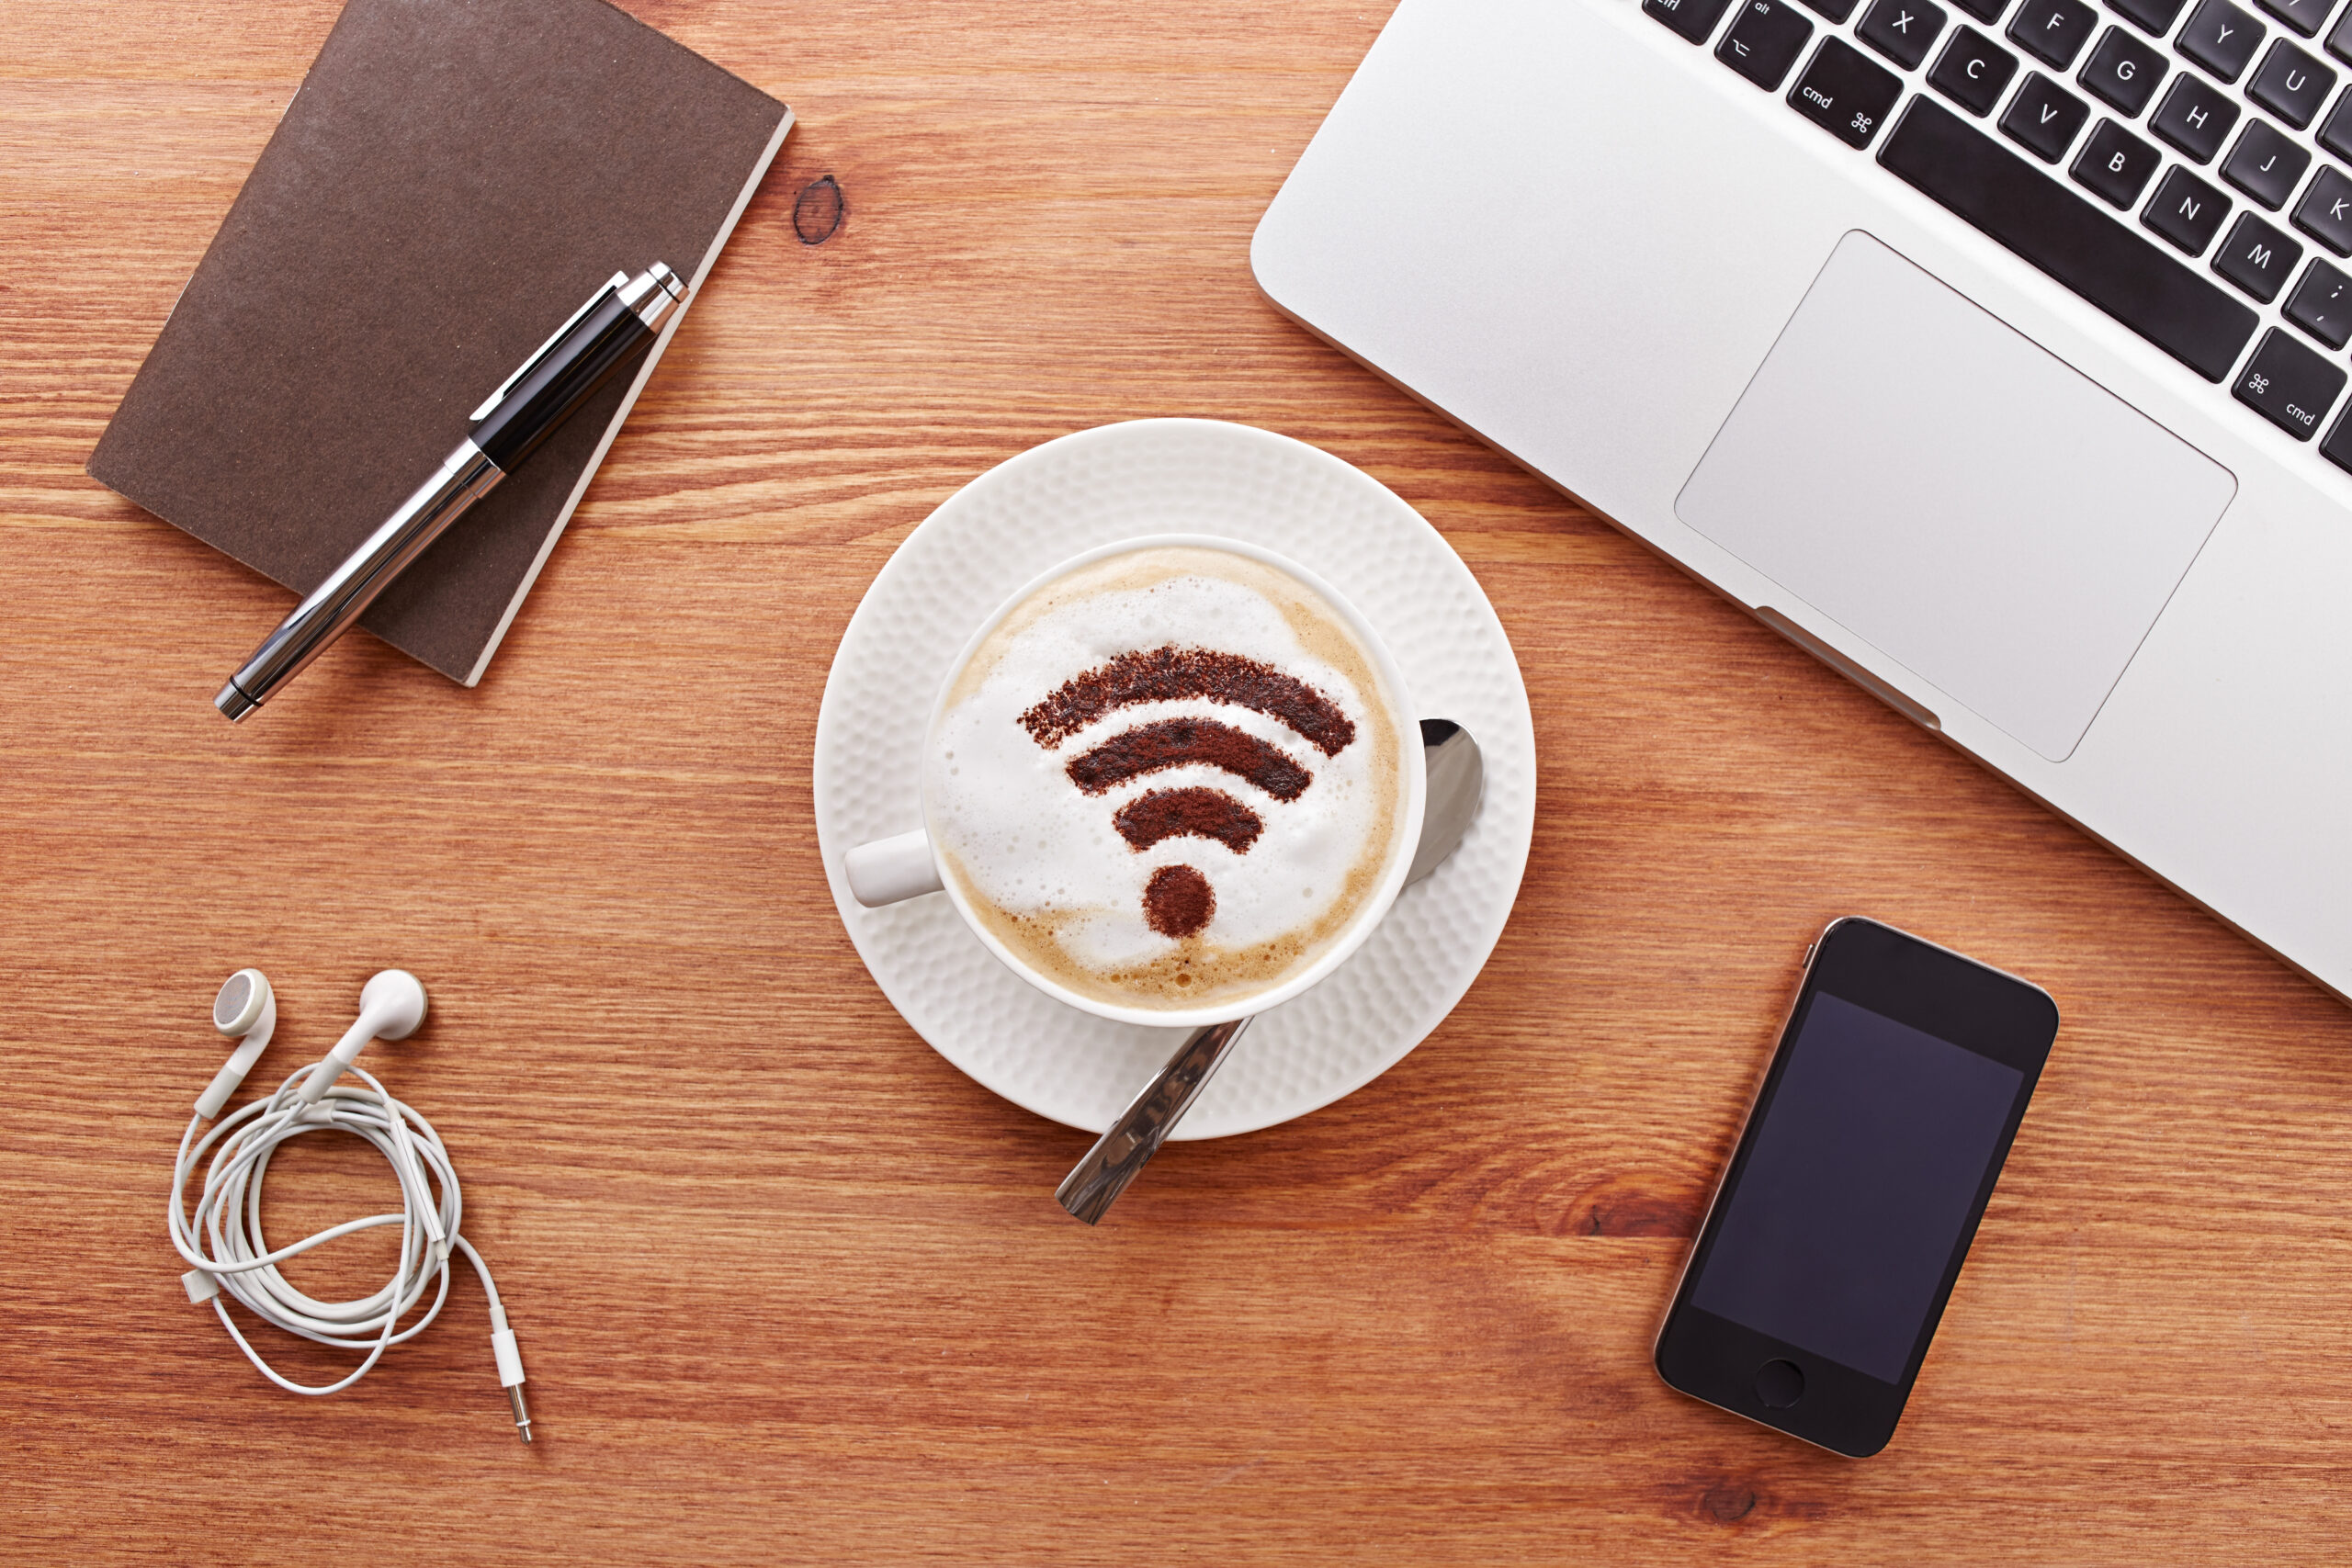 What You Don’t Know About Today’s Wi-Fi Can Hurt You